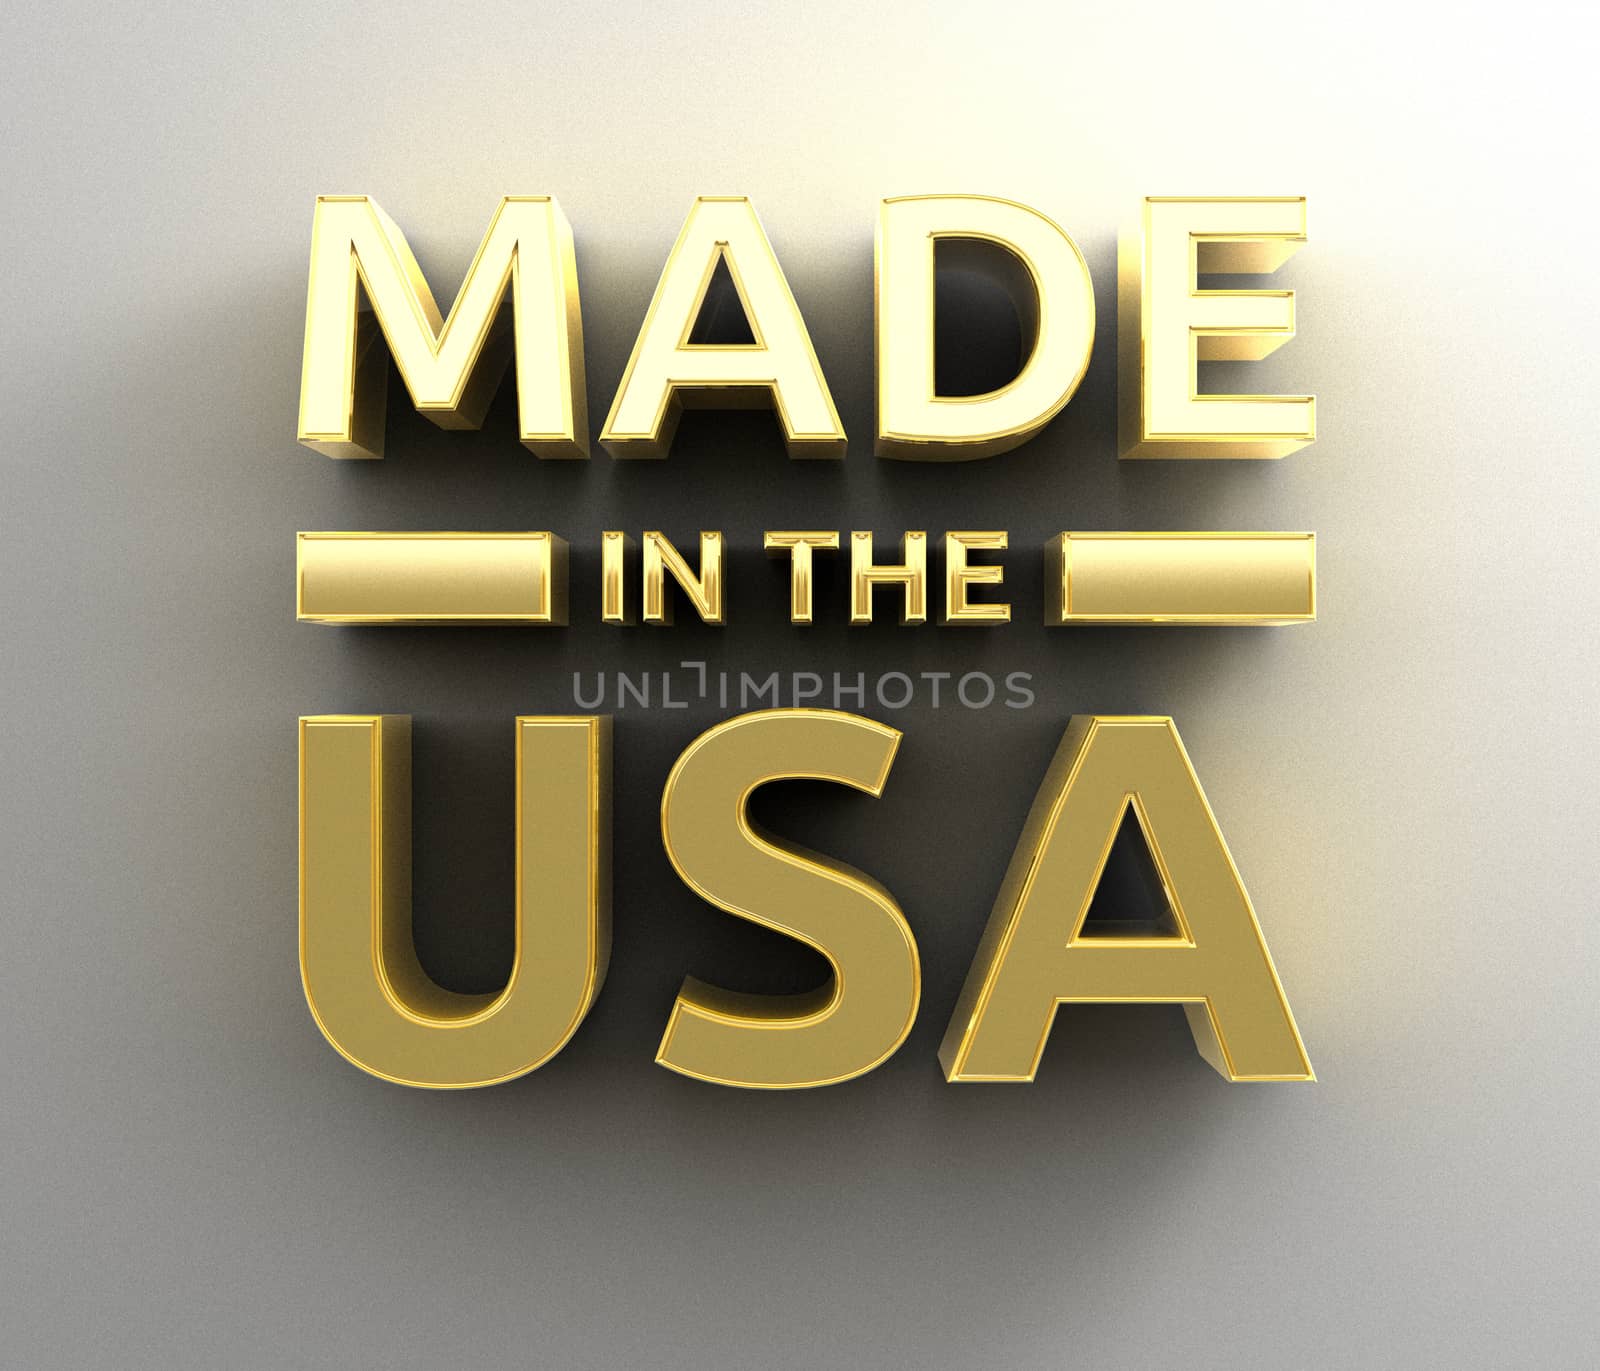 Made in the USA - gold 3D quality render on the wall background with soft shadow.